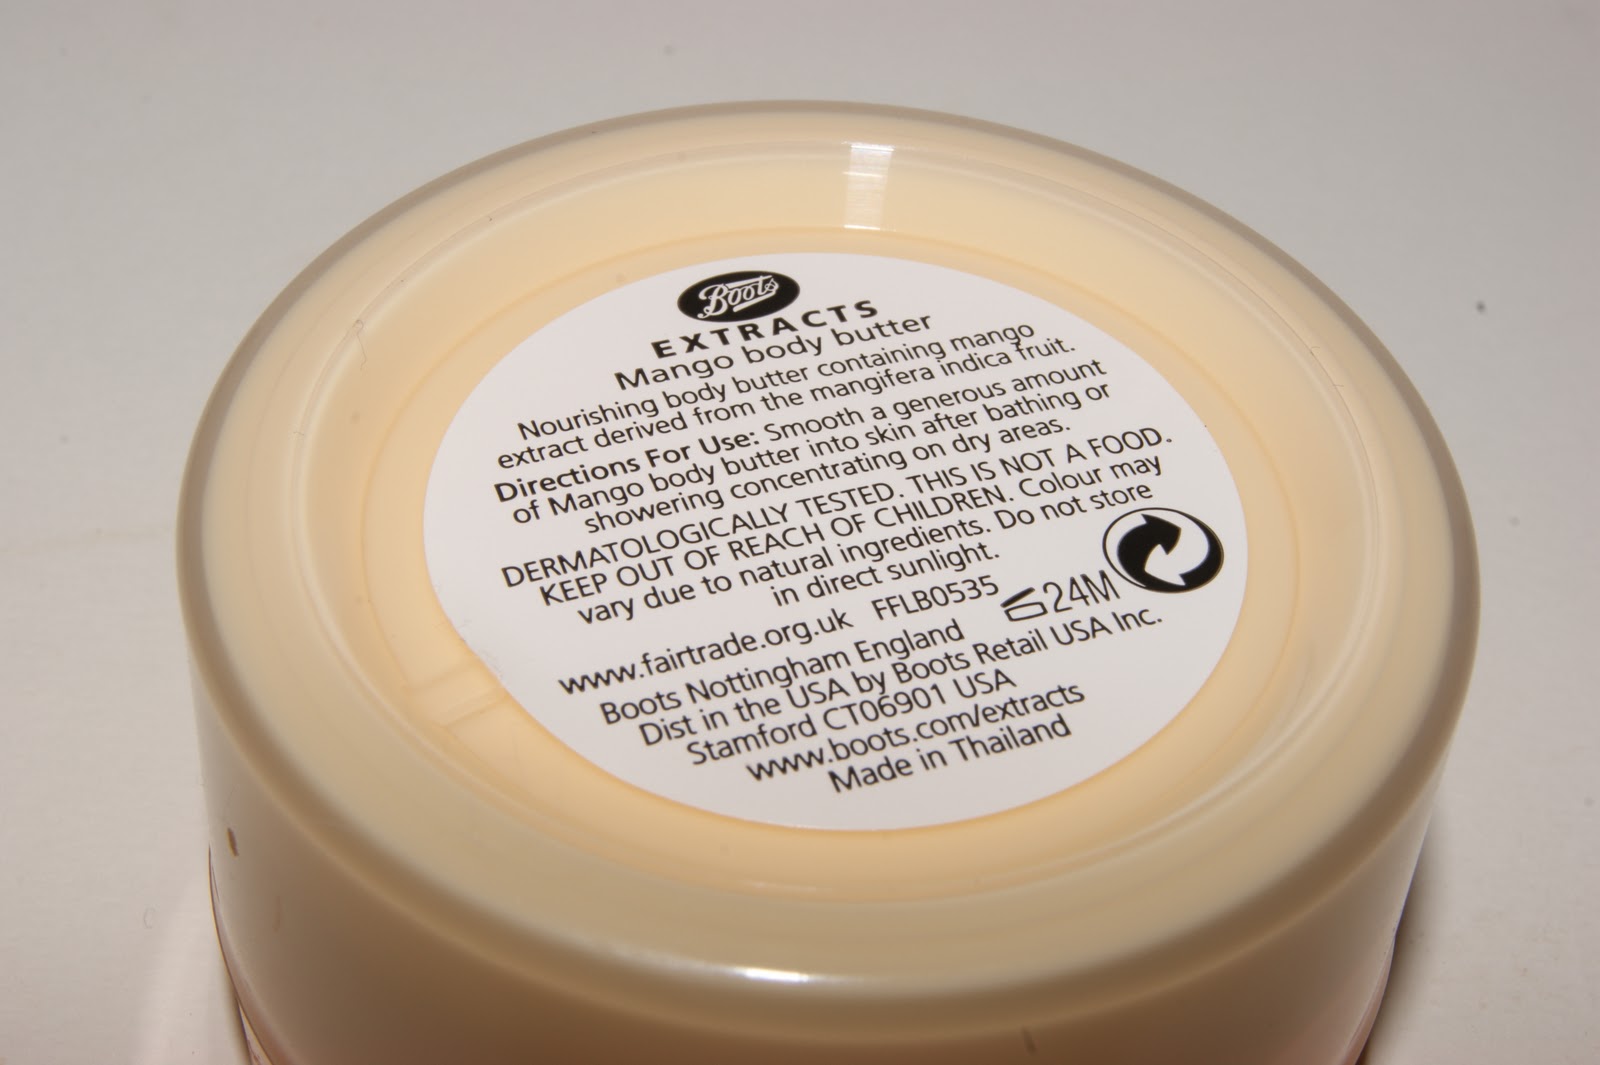 Boots Extracts Mango Body Butter Review | The Sunday Girl